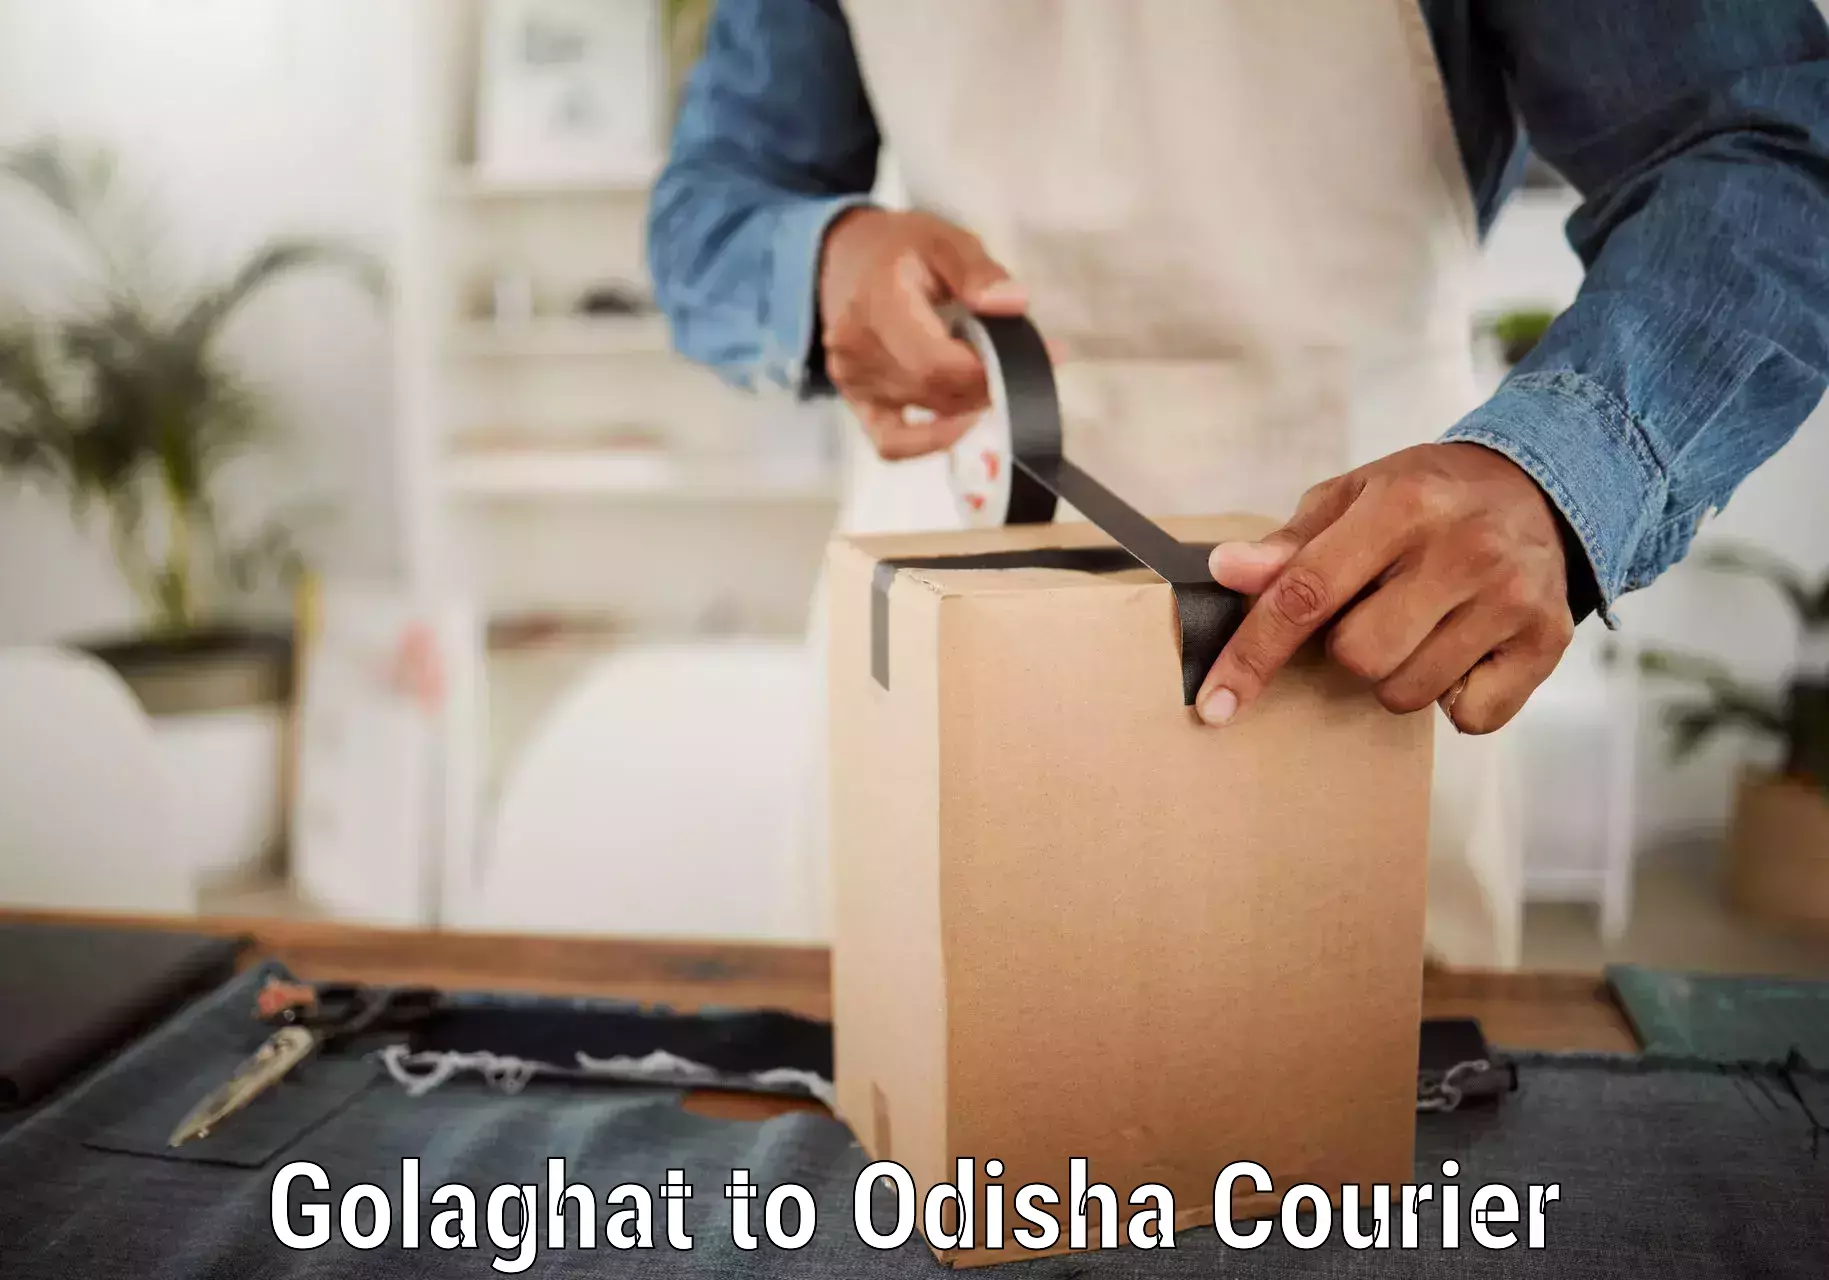 Professional courier handling Golaghat to Kupari